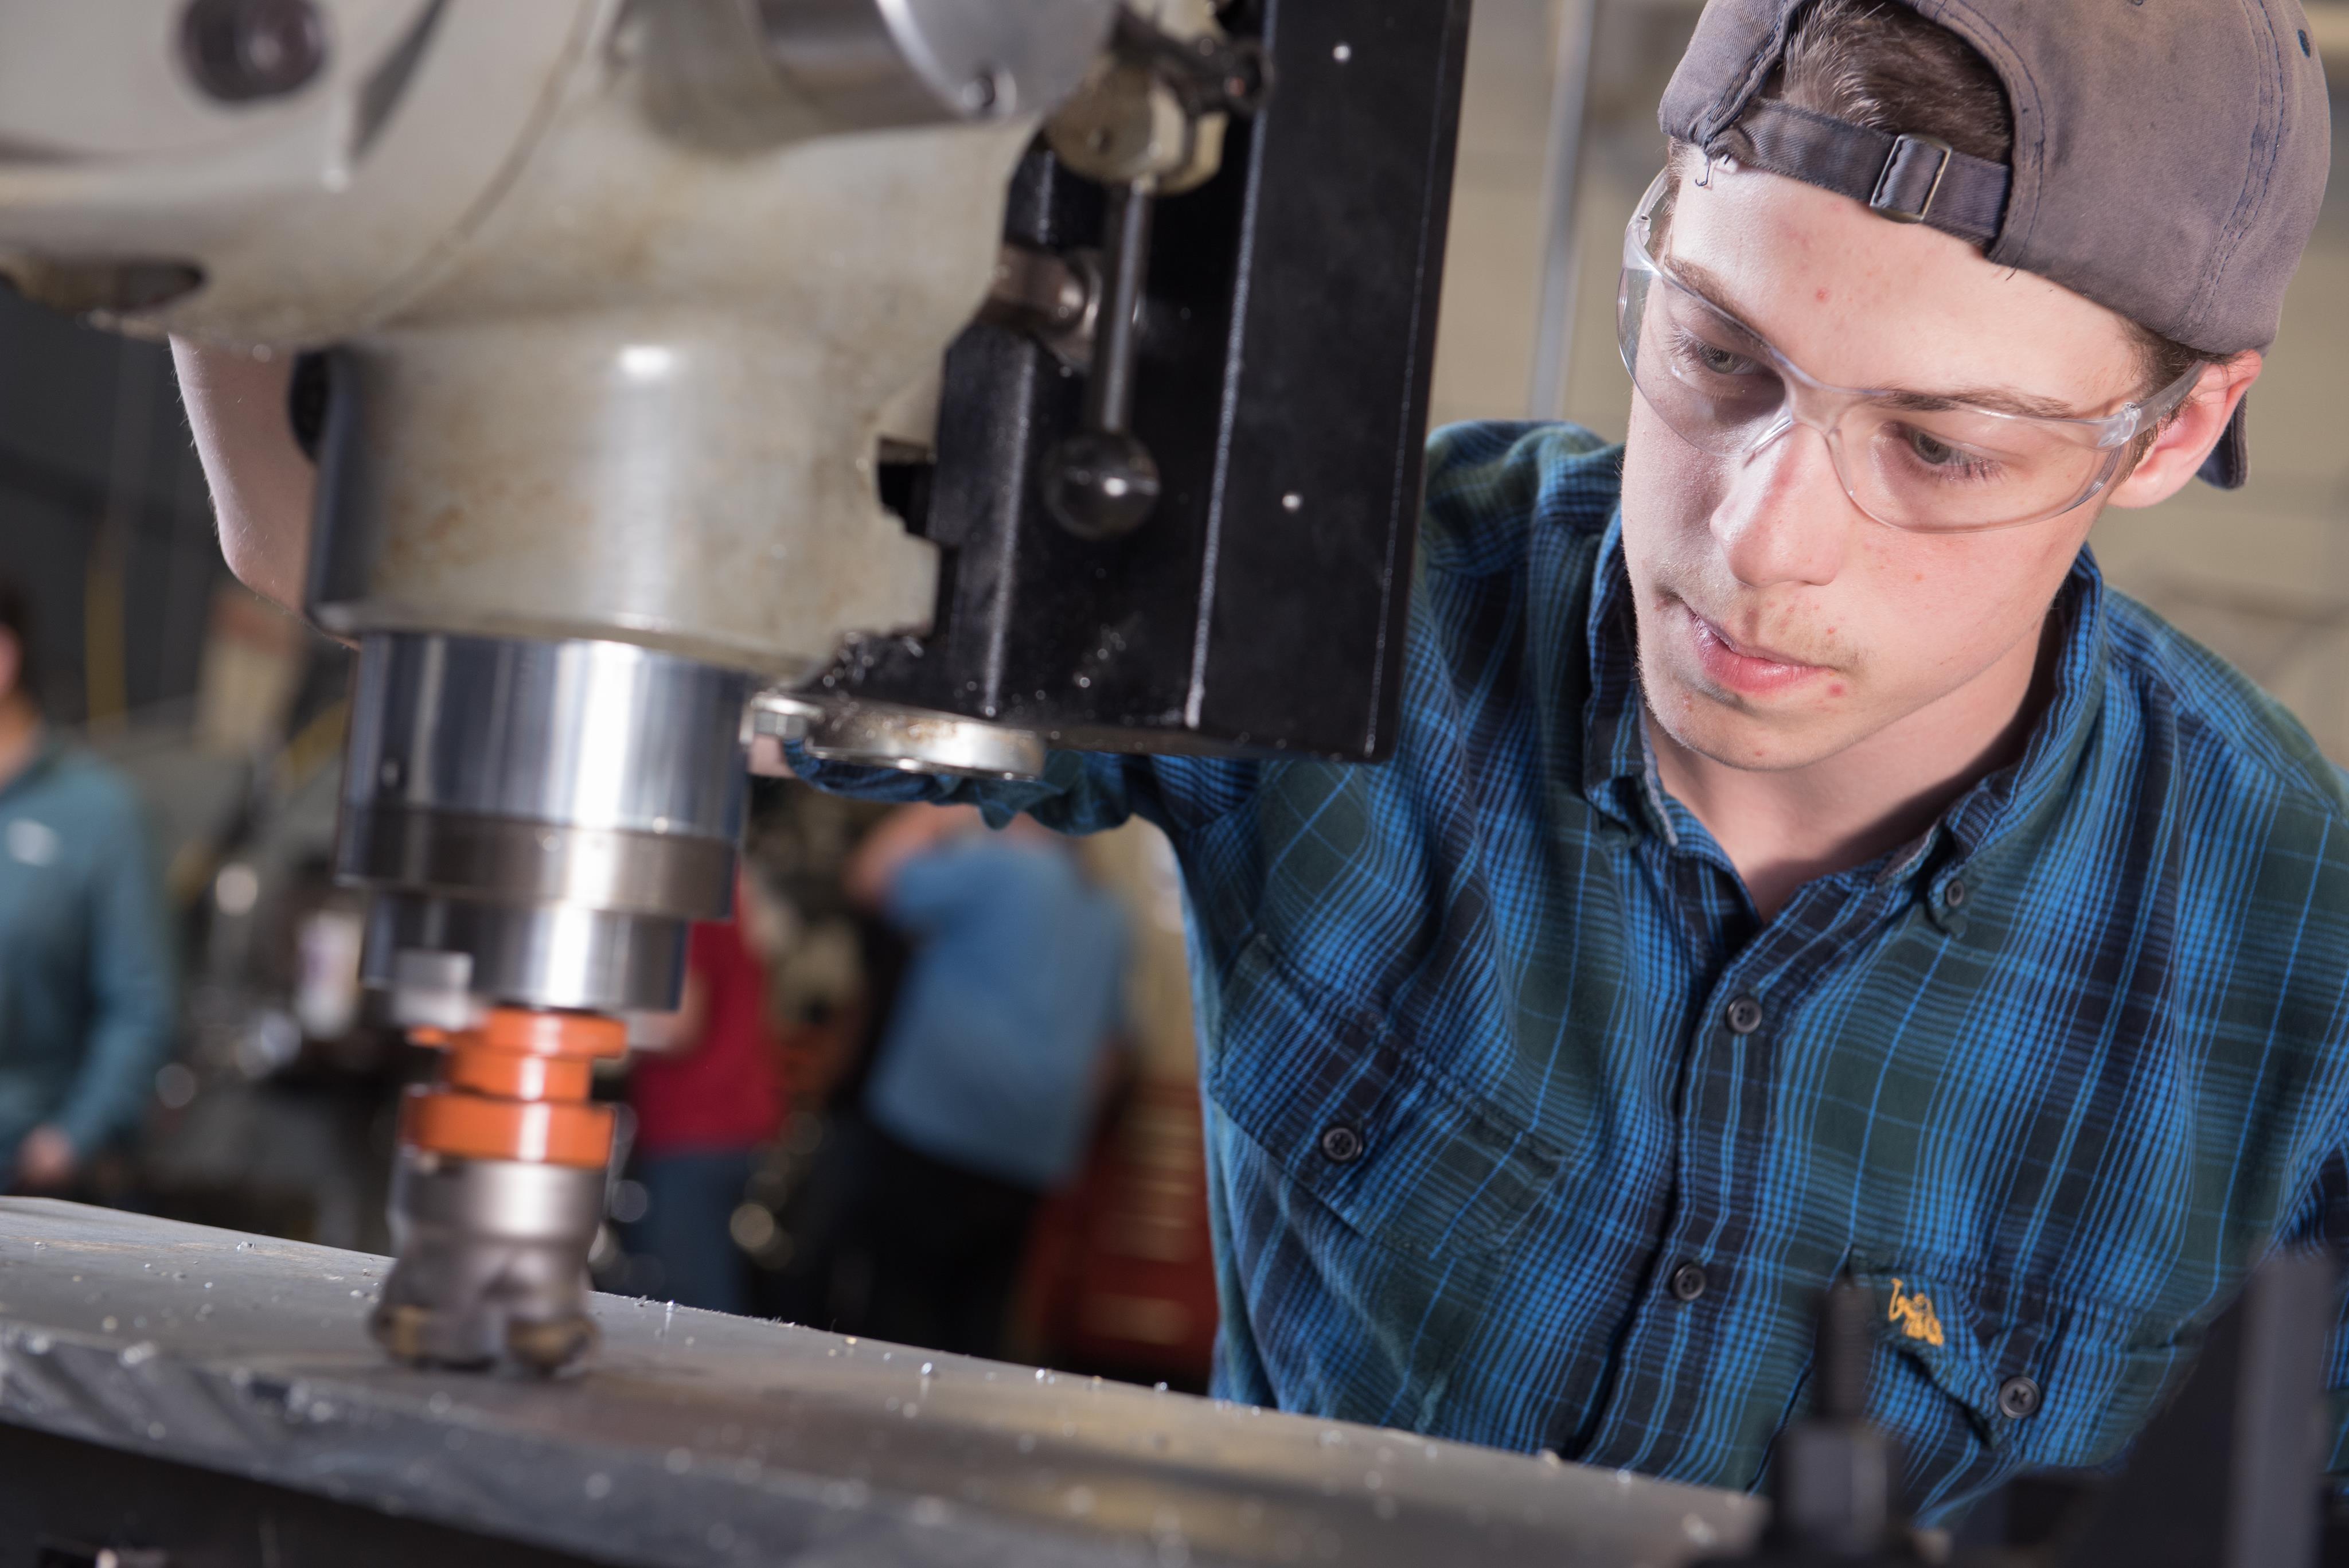 Male Precision Machining student working with equipment in class